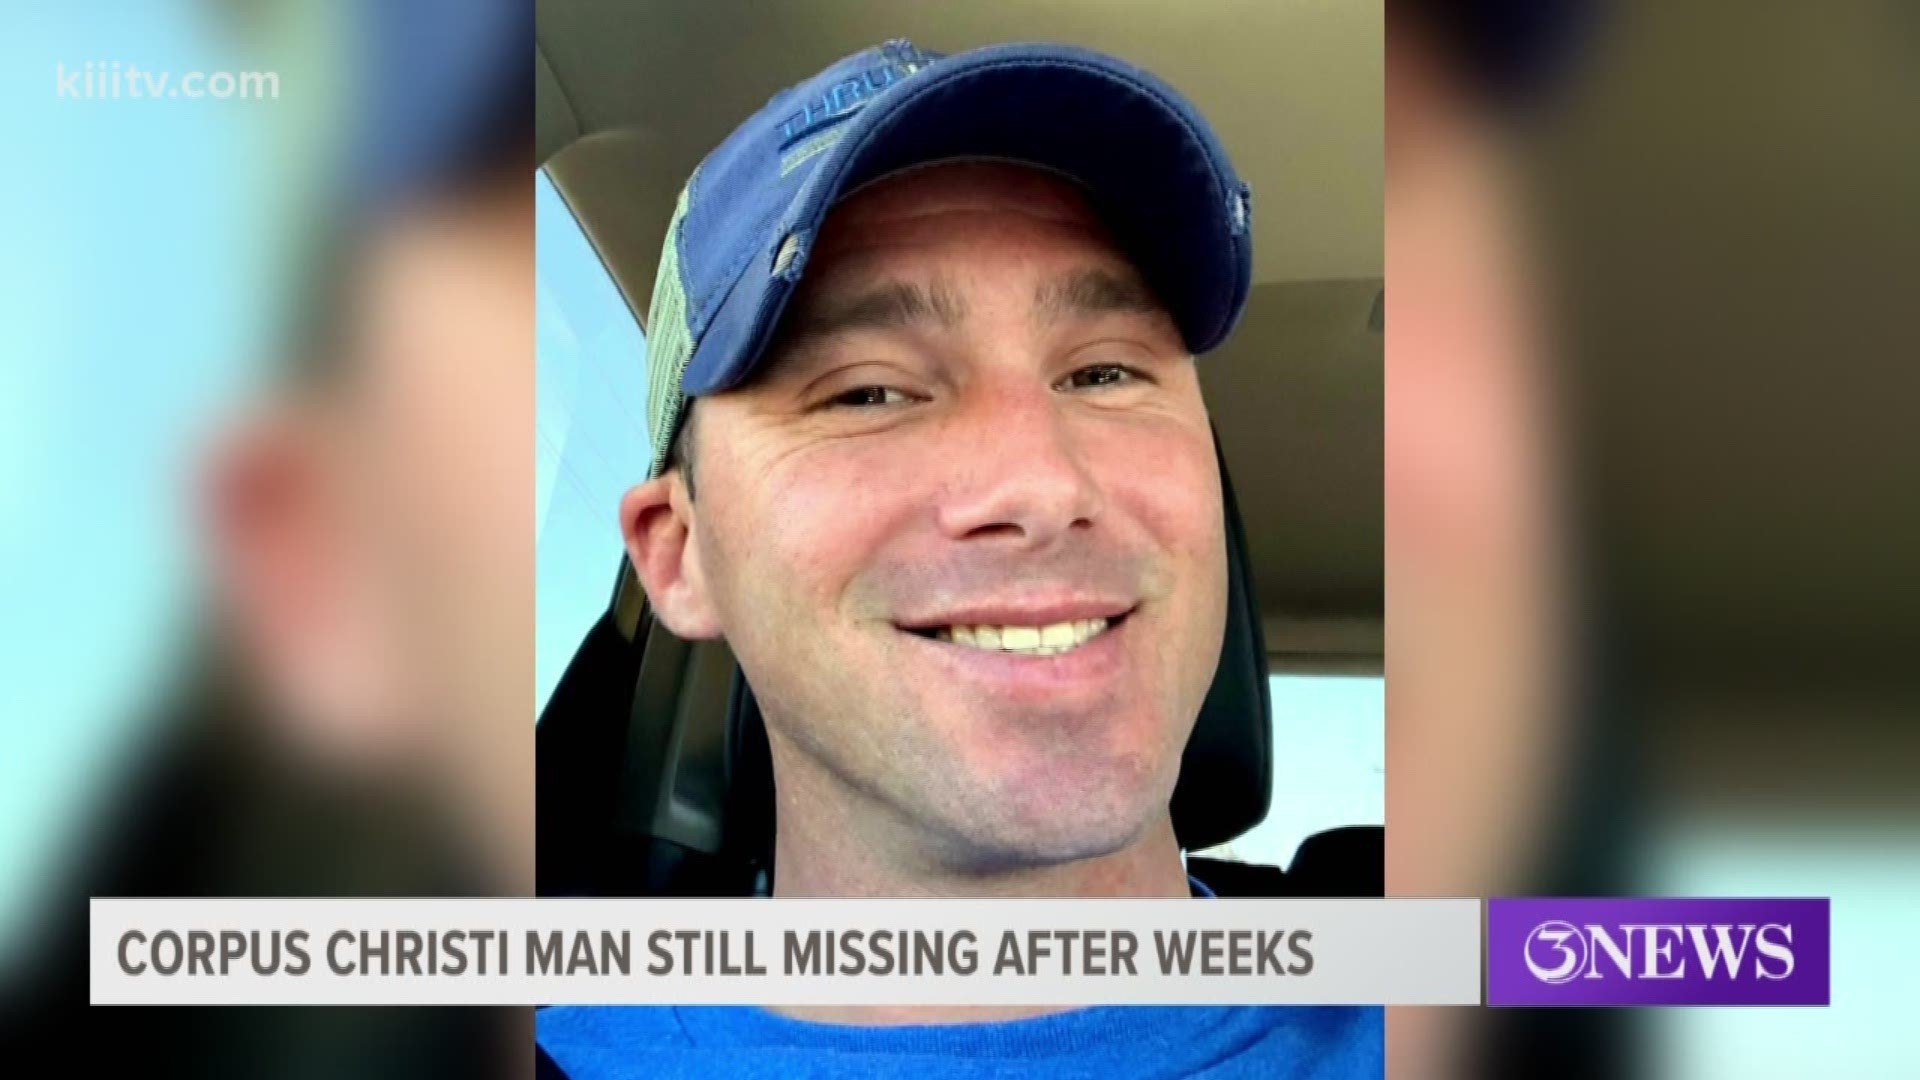 Corpus Christi man still missing after two weeks